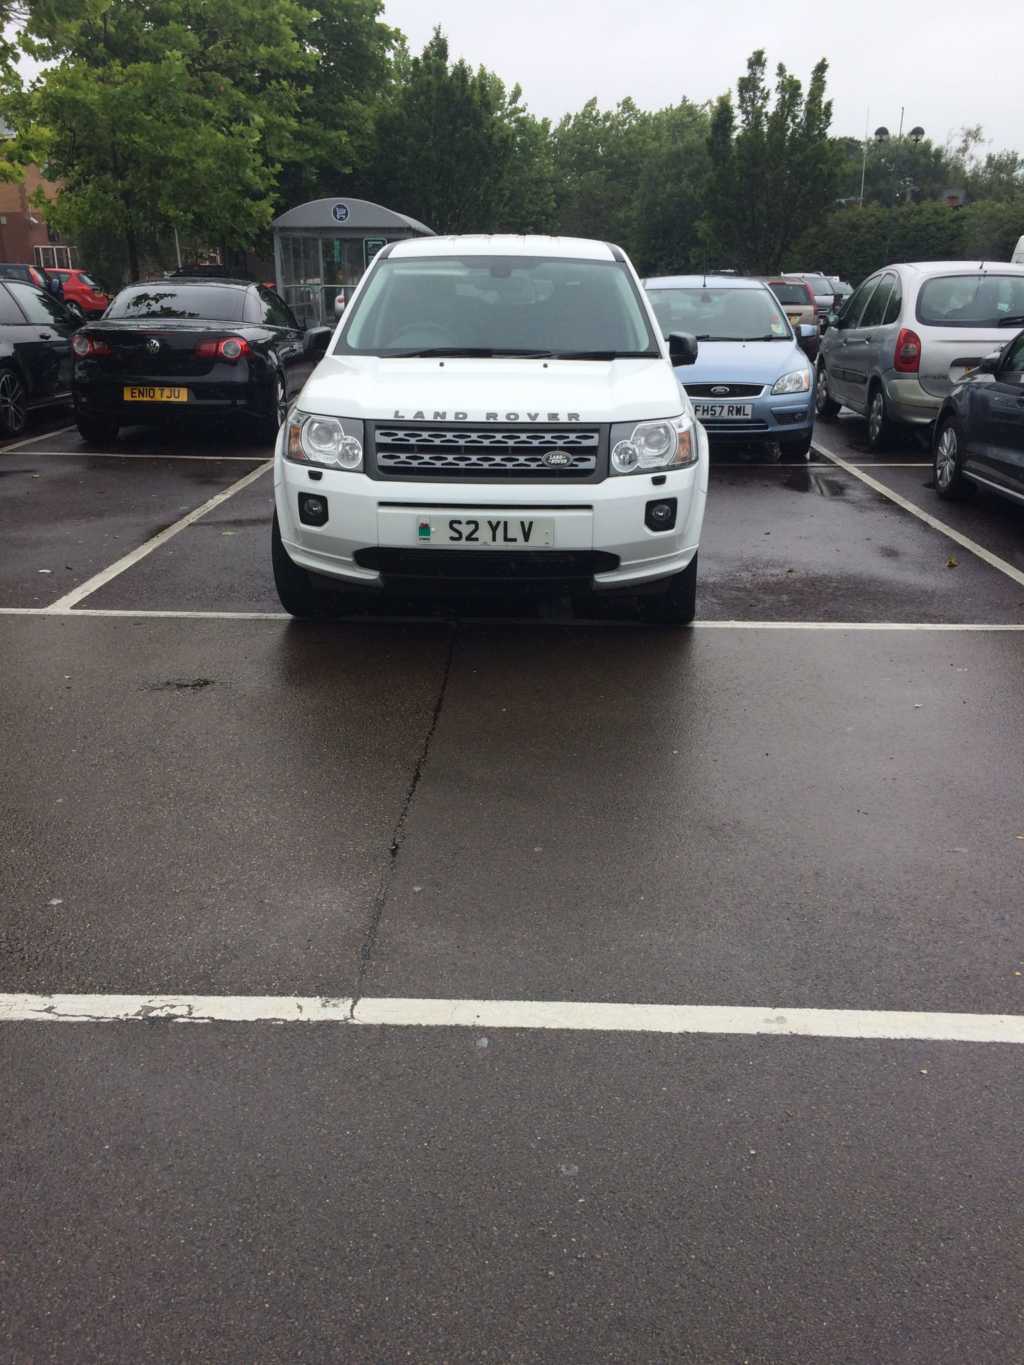 S2 YLV displaying Inconsiderate Parking